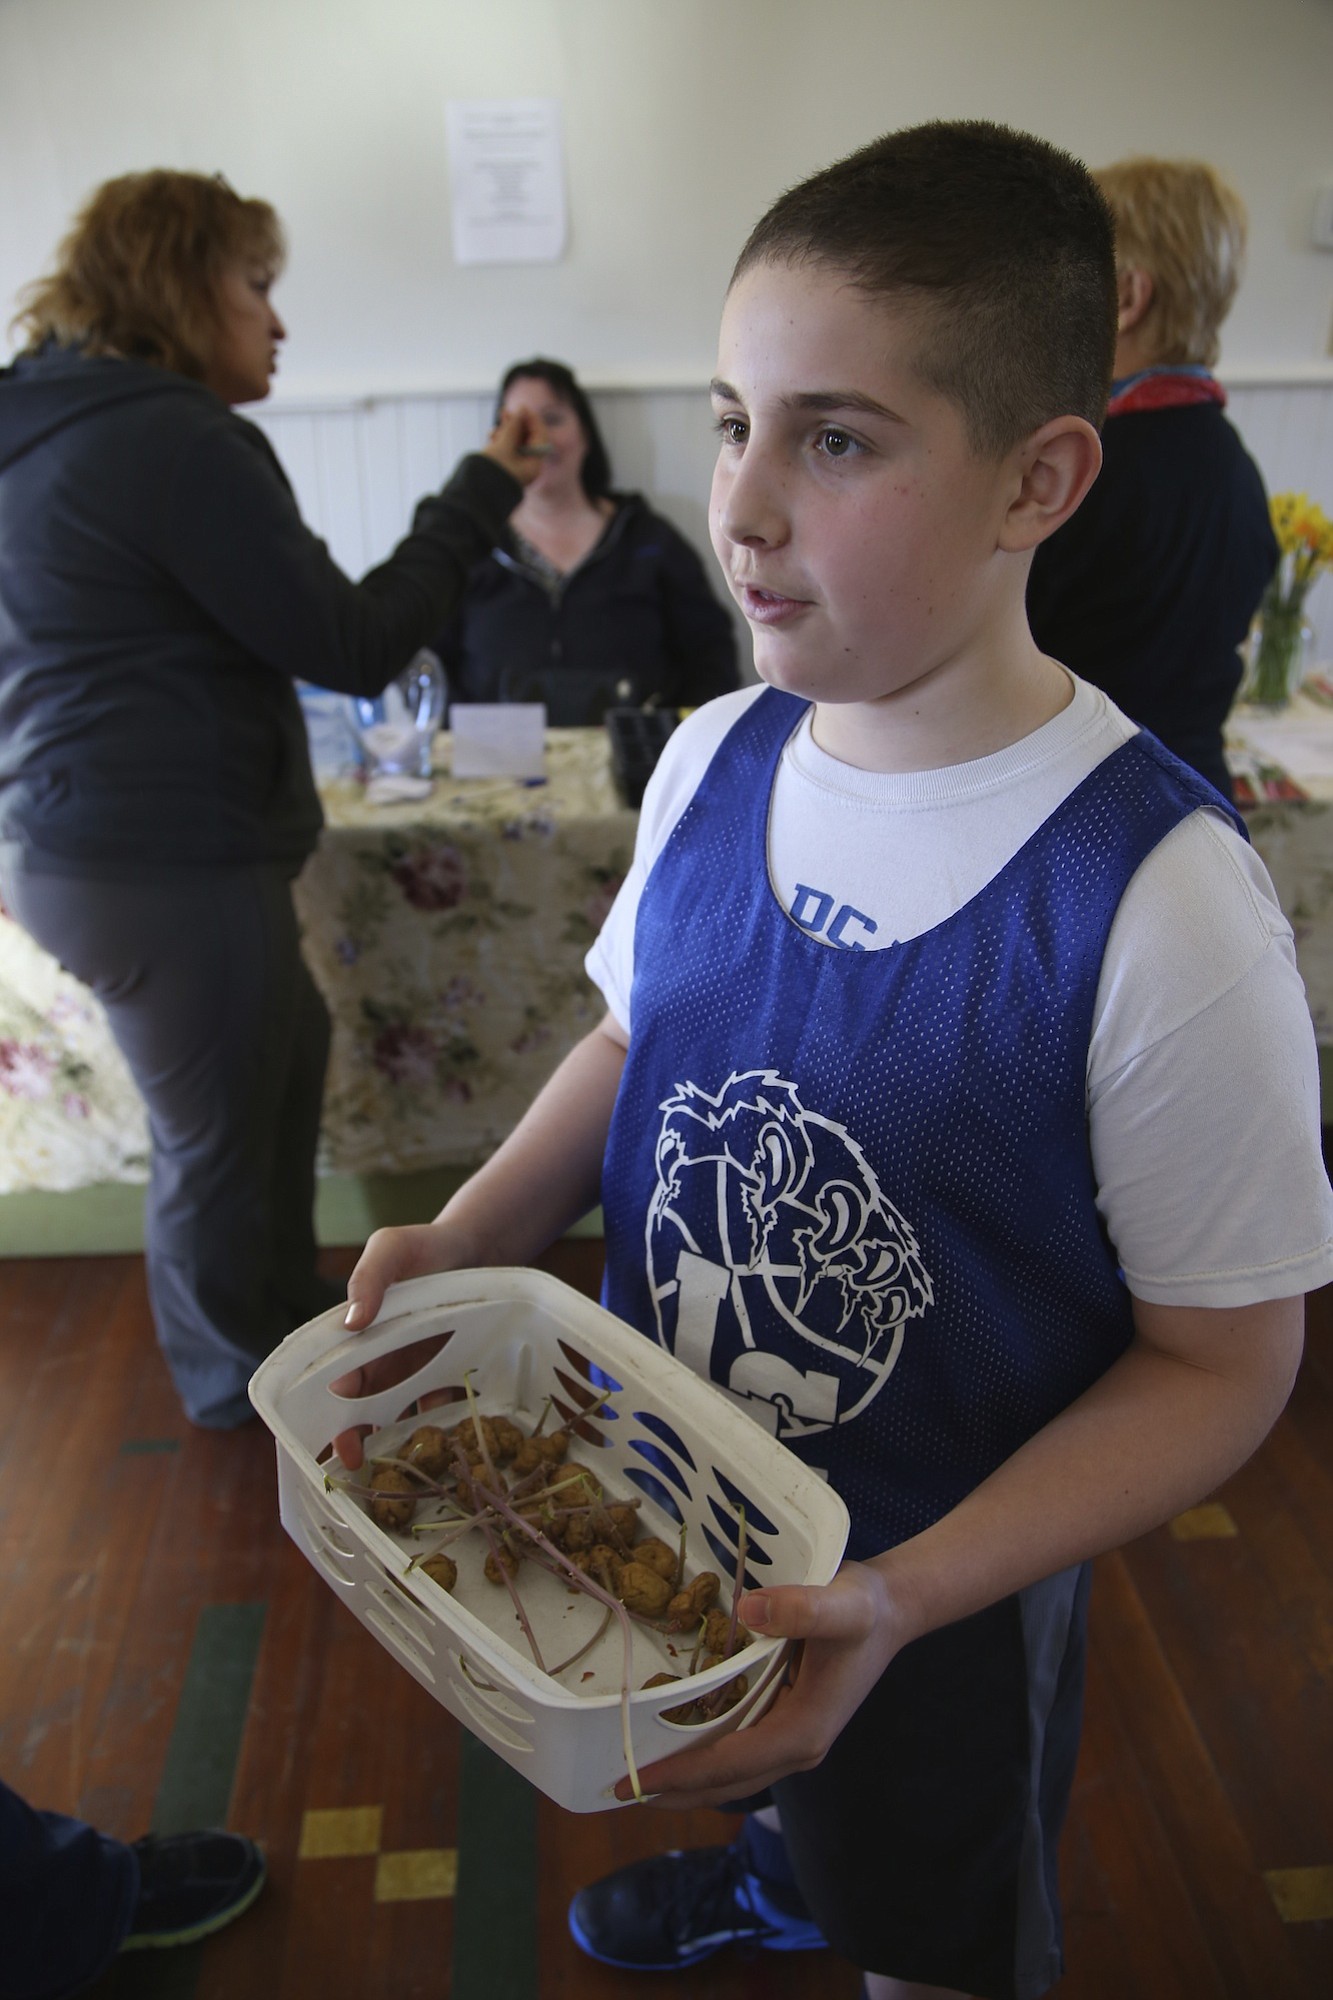 Jacob Luiz, 12, brings a basket of Yukon Gold seed potatoes to the Great Clark County Seed Swap at the La Center Grange.